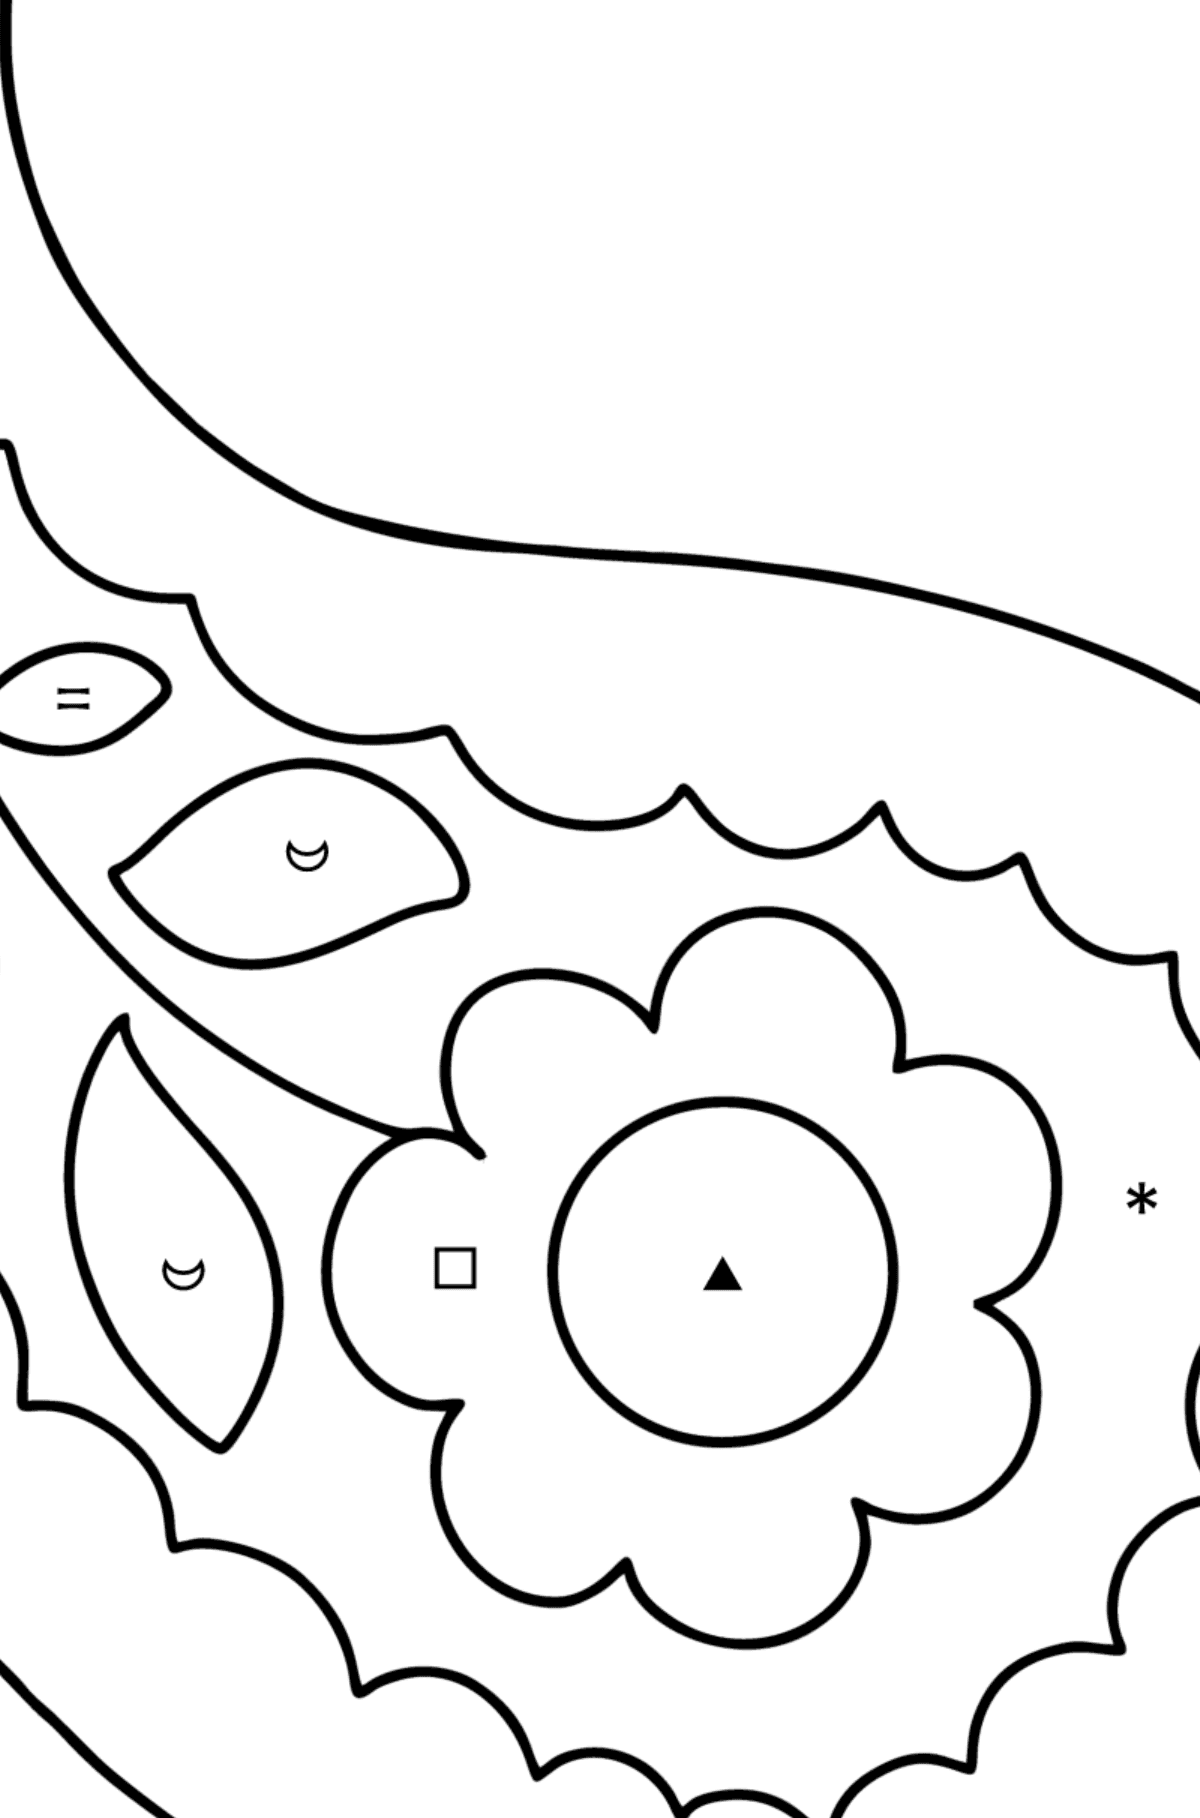 Paisley coloring page for baby - Coloring by Symbols and Geometric Shapes for Kids